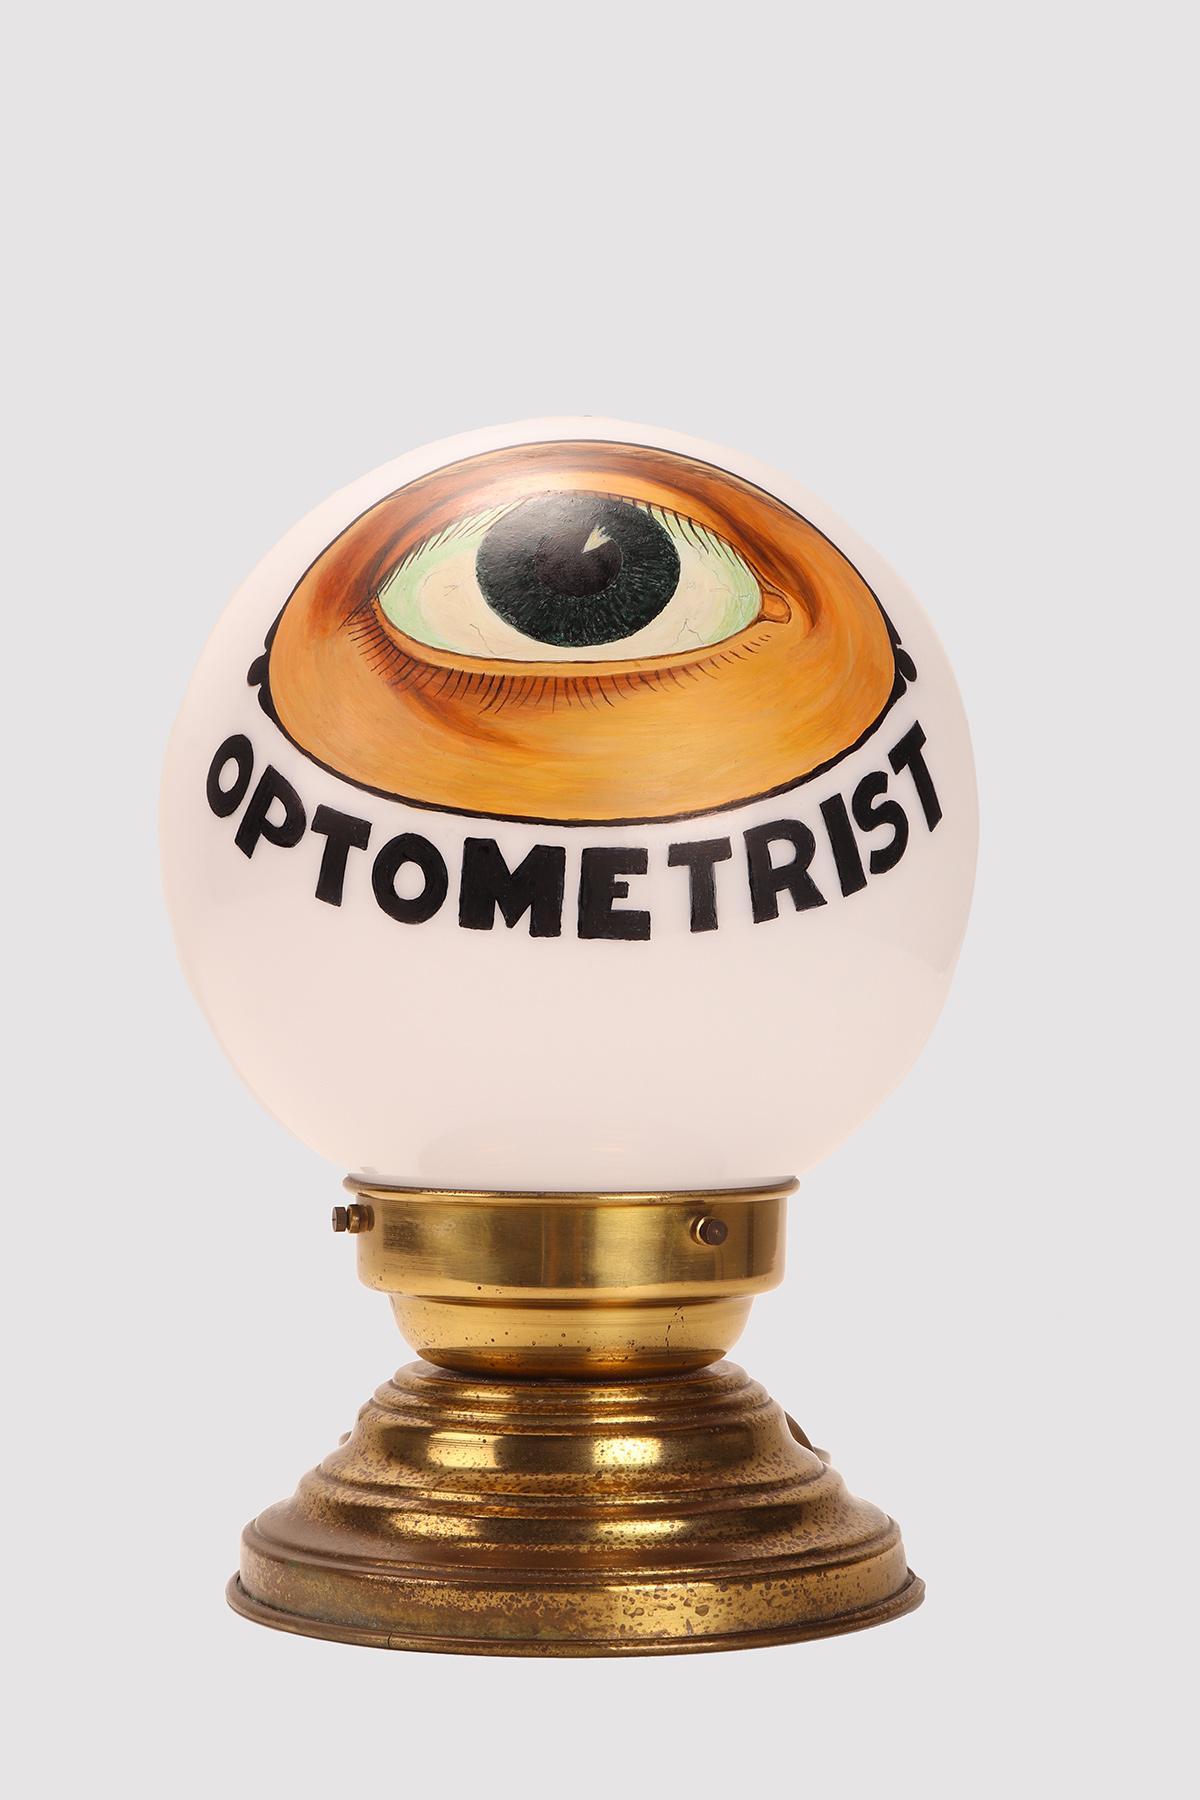 Globe-shaped light a shop window sign for optometrist in celluloid, with painted eye, and brass base support. The electrical system has been reprogrammed.
United States of America, around 1950.